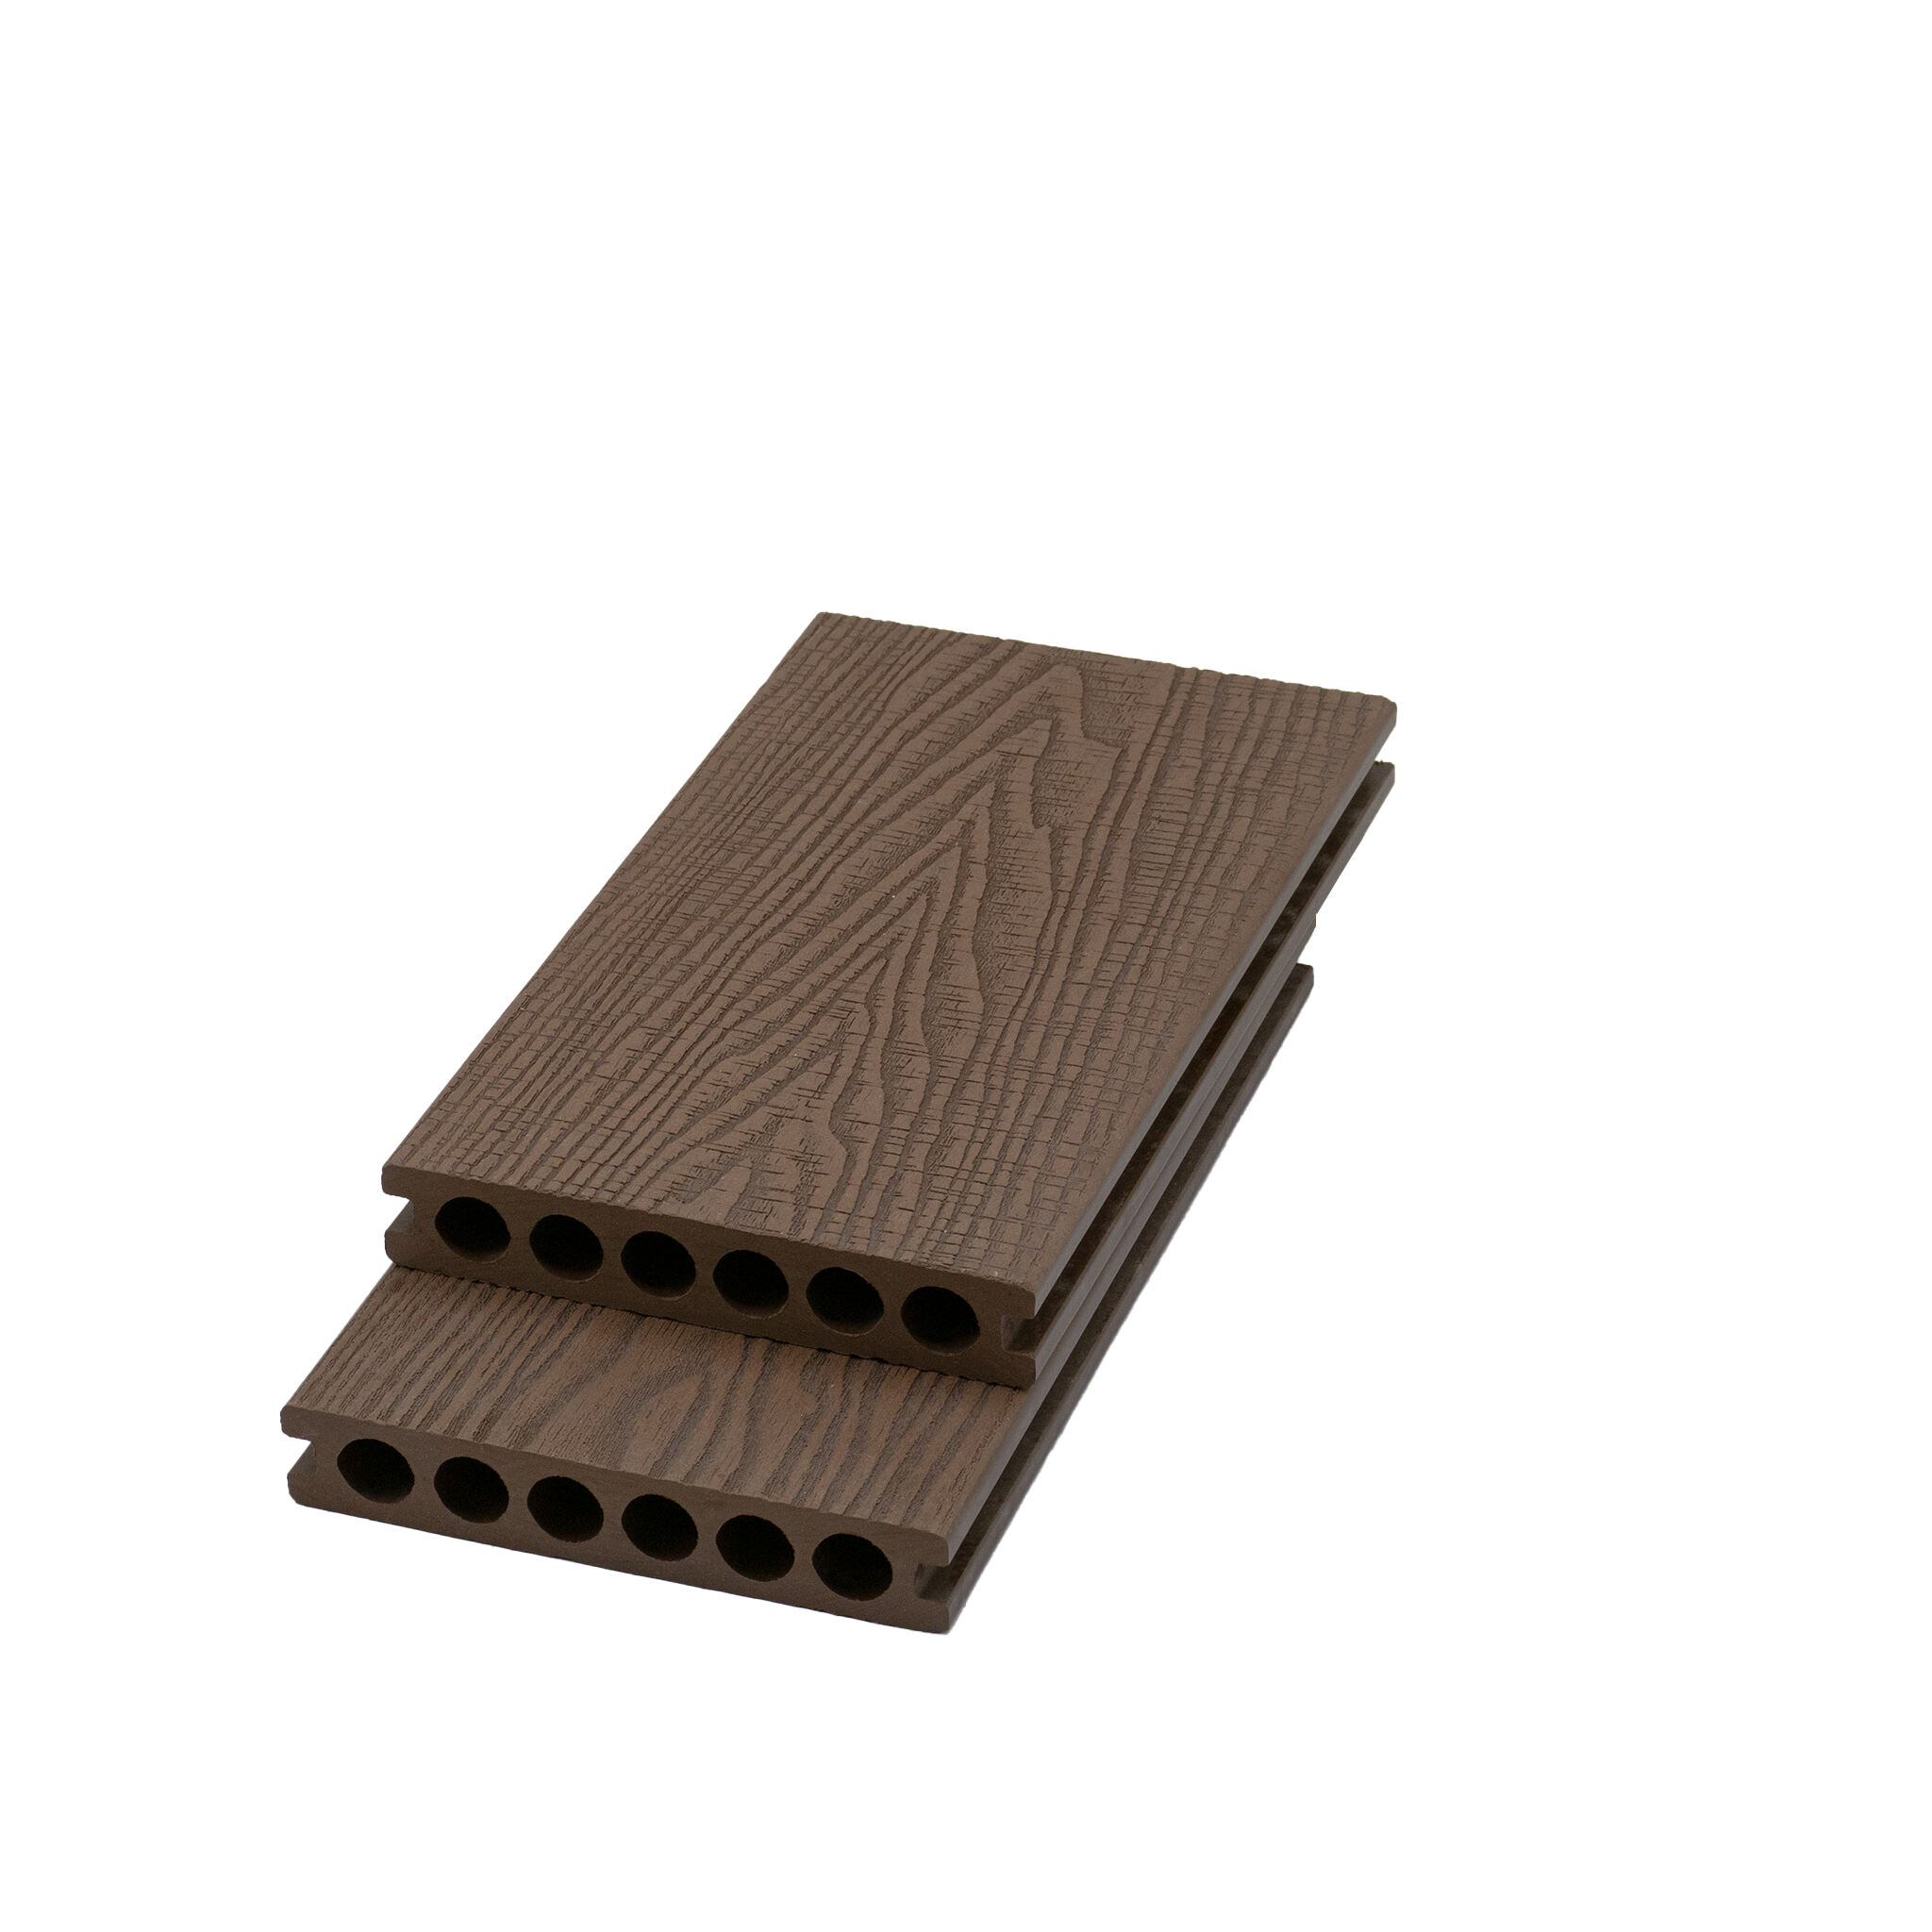  Are you looking for composite decking ideas? JFWPC offers some of the most exciting ranges of composite decking boards